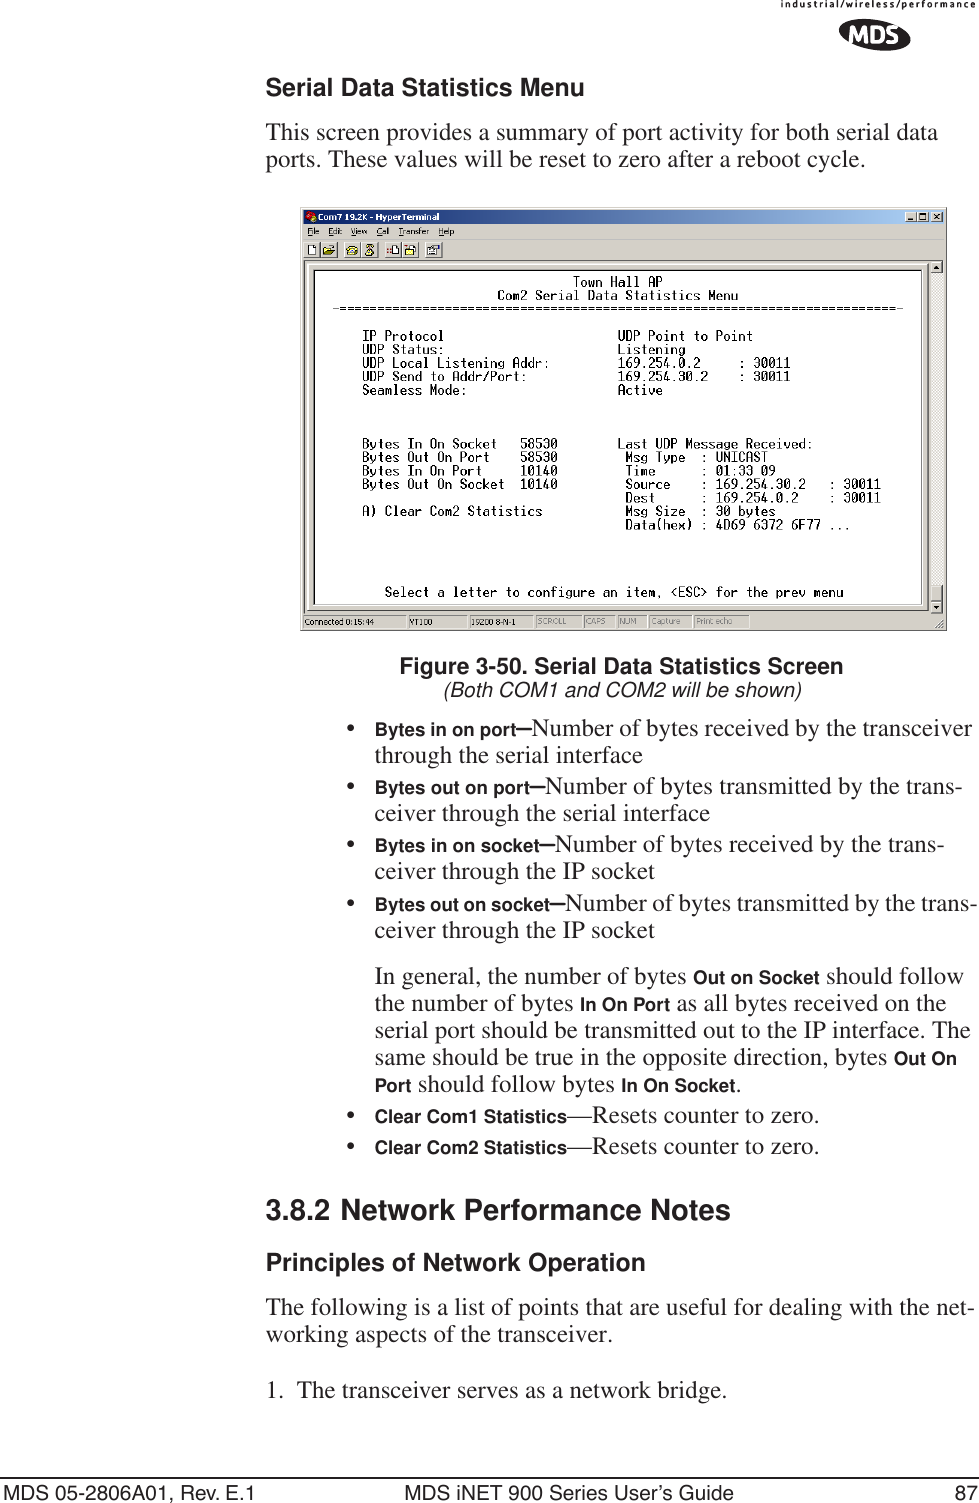 MDS 05-2806A01, Rev. E.1 MDS iNET 900 Series User’s Guide 87Serial Data Statistics MenuThis screen provides a summary of port activity for both serial data ports. These values will be reset to zero after a reboot cycle. Figure 3-50. Serial Data Statistics Screen(Both COM1 and COM2 will be shown)•Bytes in on port—Number of bytes received by the transceiver through the serial interface•Bytes out on port—Number of bytes transmitted by the trans-ceiver through the serial interface•Bytes in on socket—Number of bytes received by the trans-ceiver through the IP socket•Bytes out on socket—Number of bytes transmitted by the trans-ceiver through the IP socketIn general, the number of bytes Out on Socket should follow the number of bytes In On Port as all bytes received on the serial port should be transmitted out to the IP interface. The same should be true in the opposite direction, bytes Out On Port should follow bytes In On Socket.•Clear Com1 Statistics—Resets counter to zero.•Clear Com2 Statistics—Resets counter to zero.3.8.2 Network Performance NotesPrinciples of Network OperationThe following is a list of points that are useful for dealing with the net-working aspects of the transceiver.1. The transceiver serves as a network bridge.